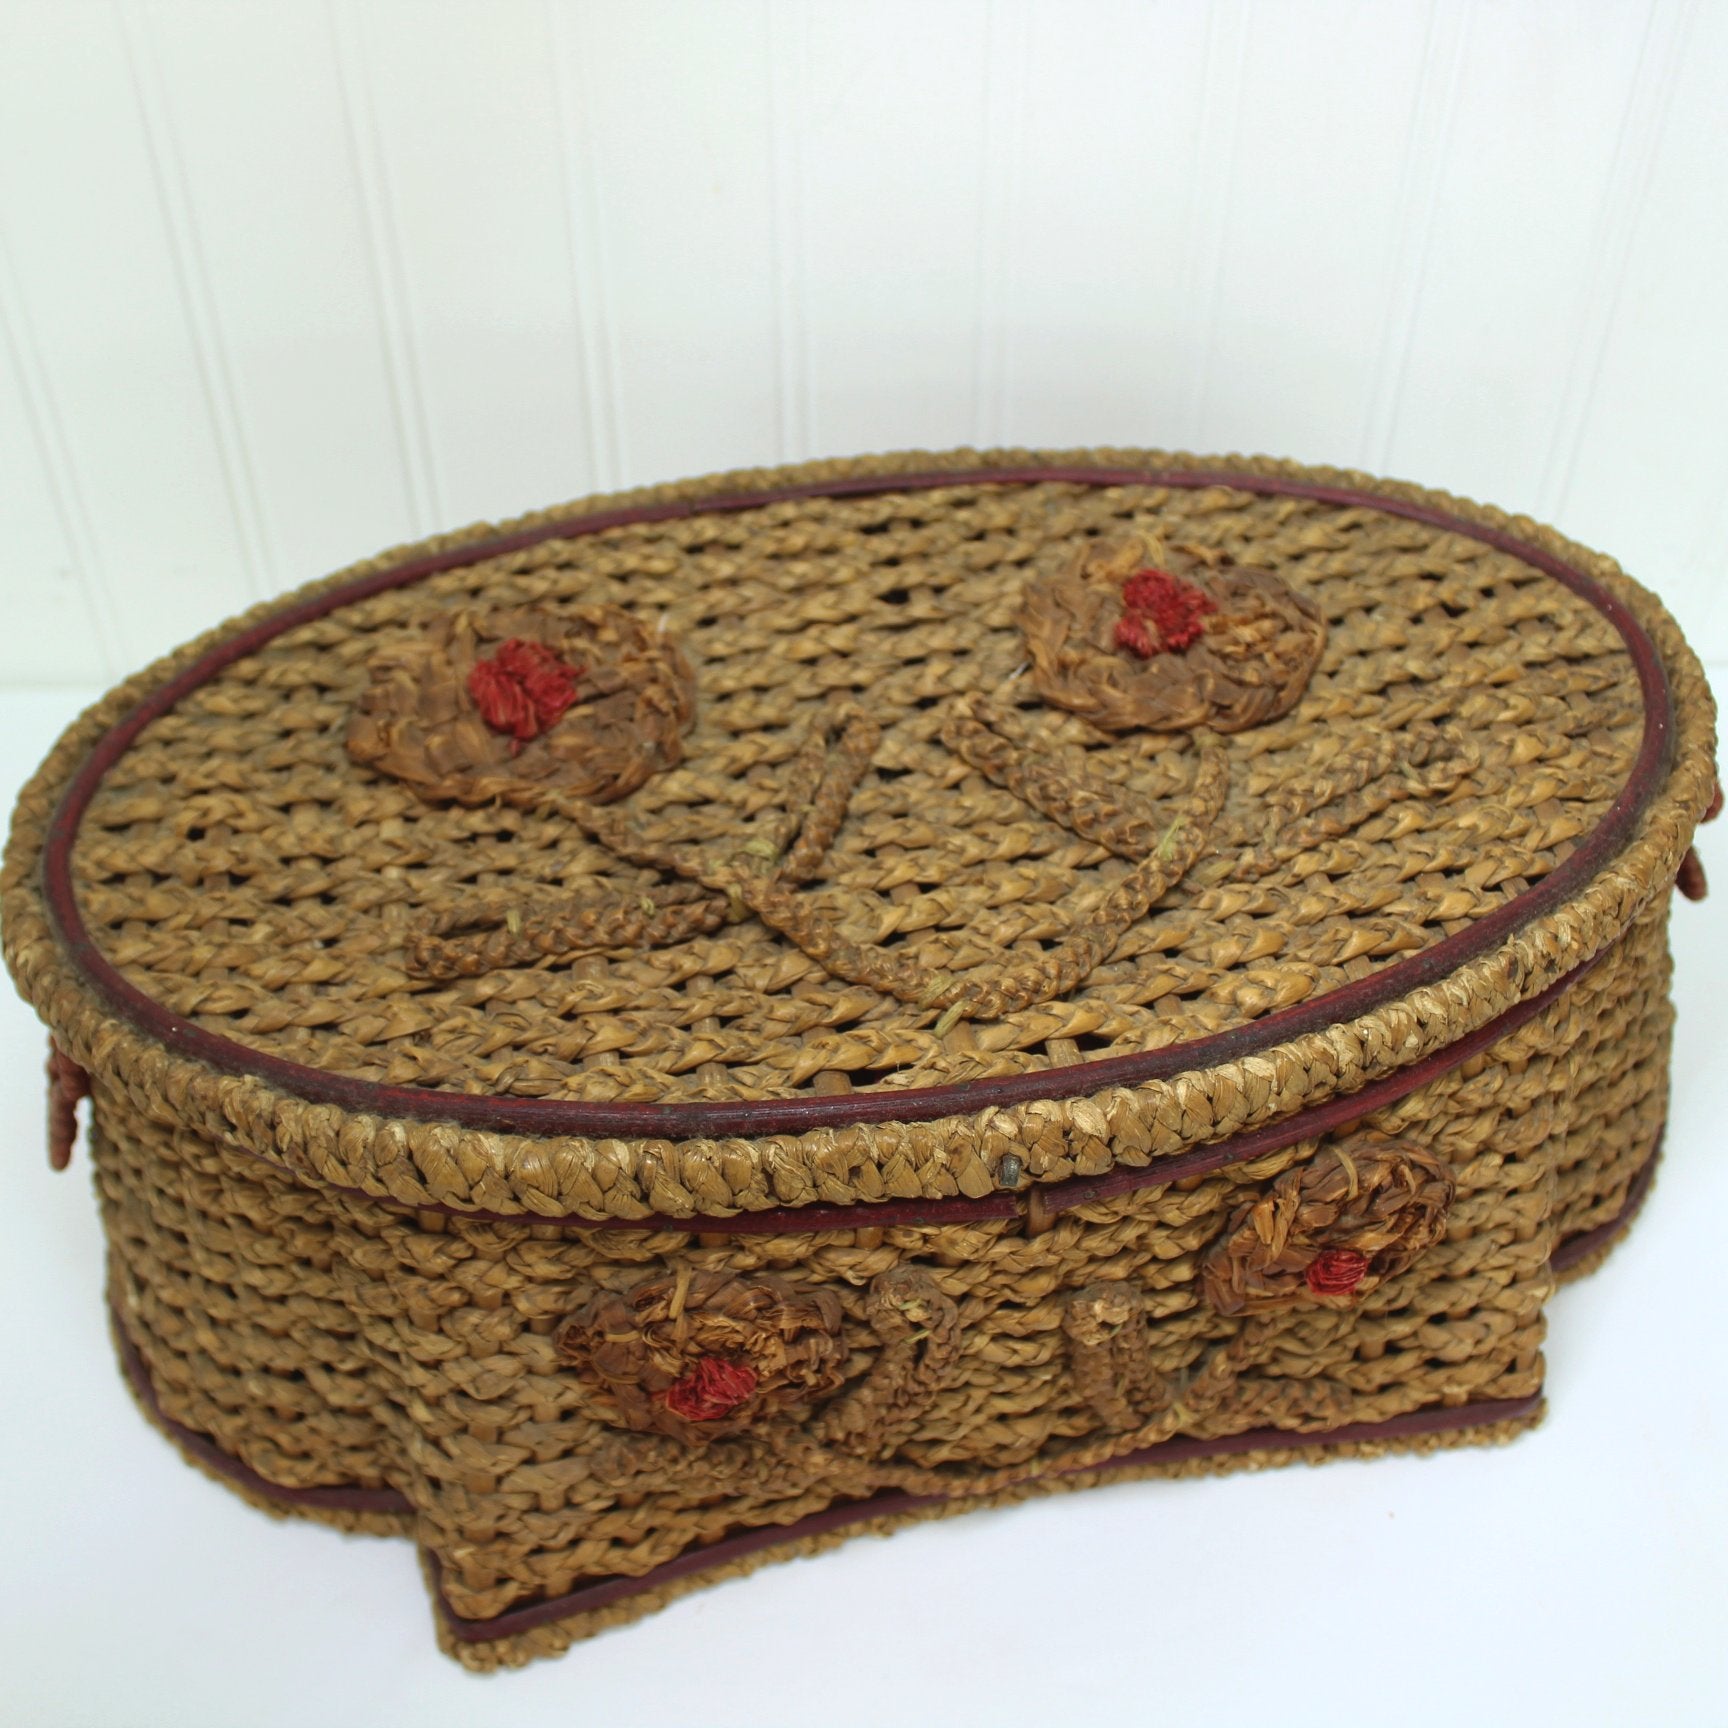 VINTAGE LARGE FOOTED SEWING WICKER BASKET WITH FLORAL LID SATIN